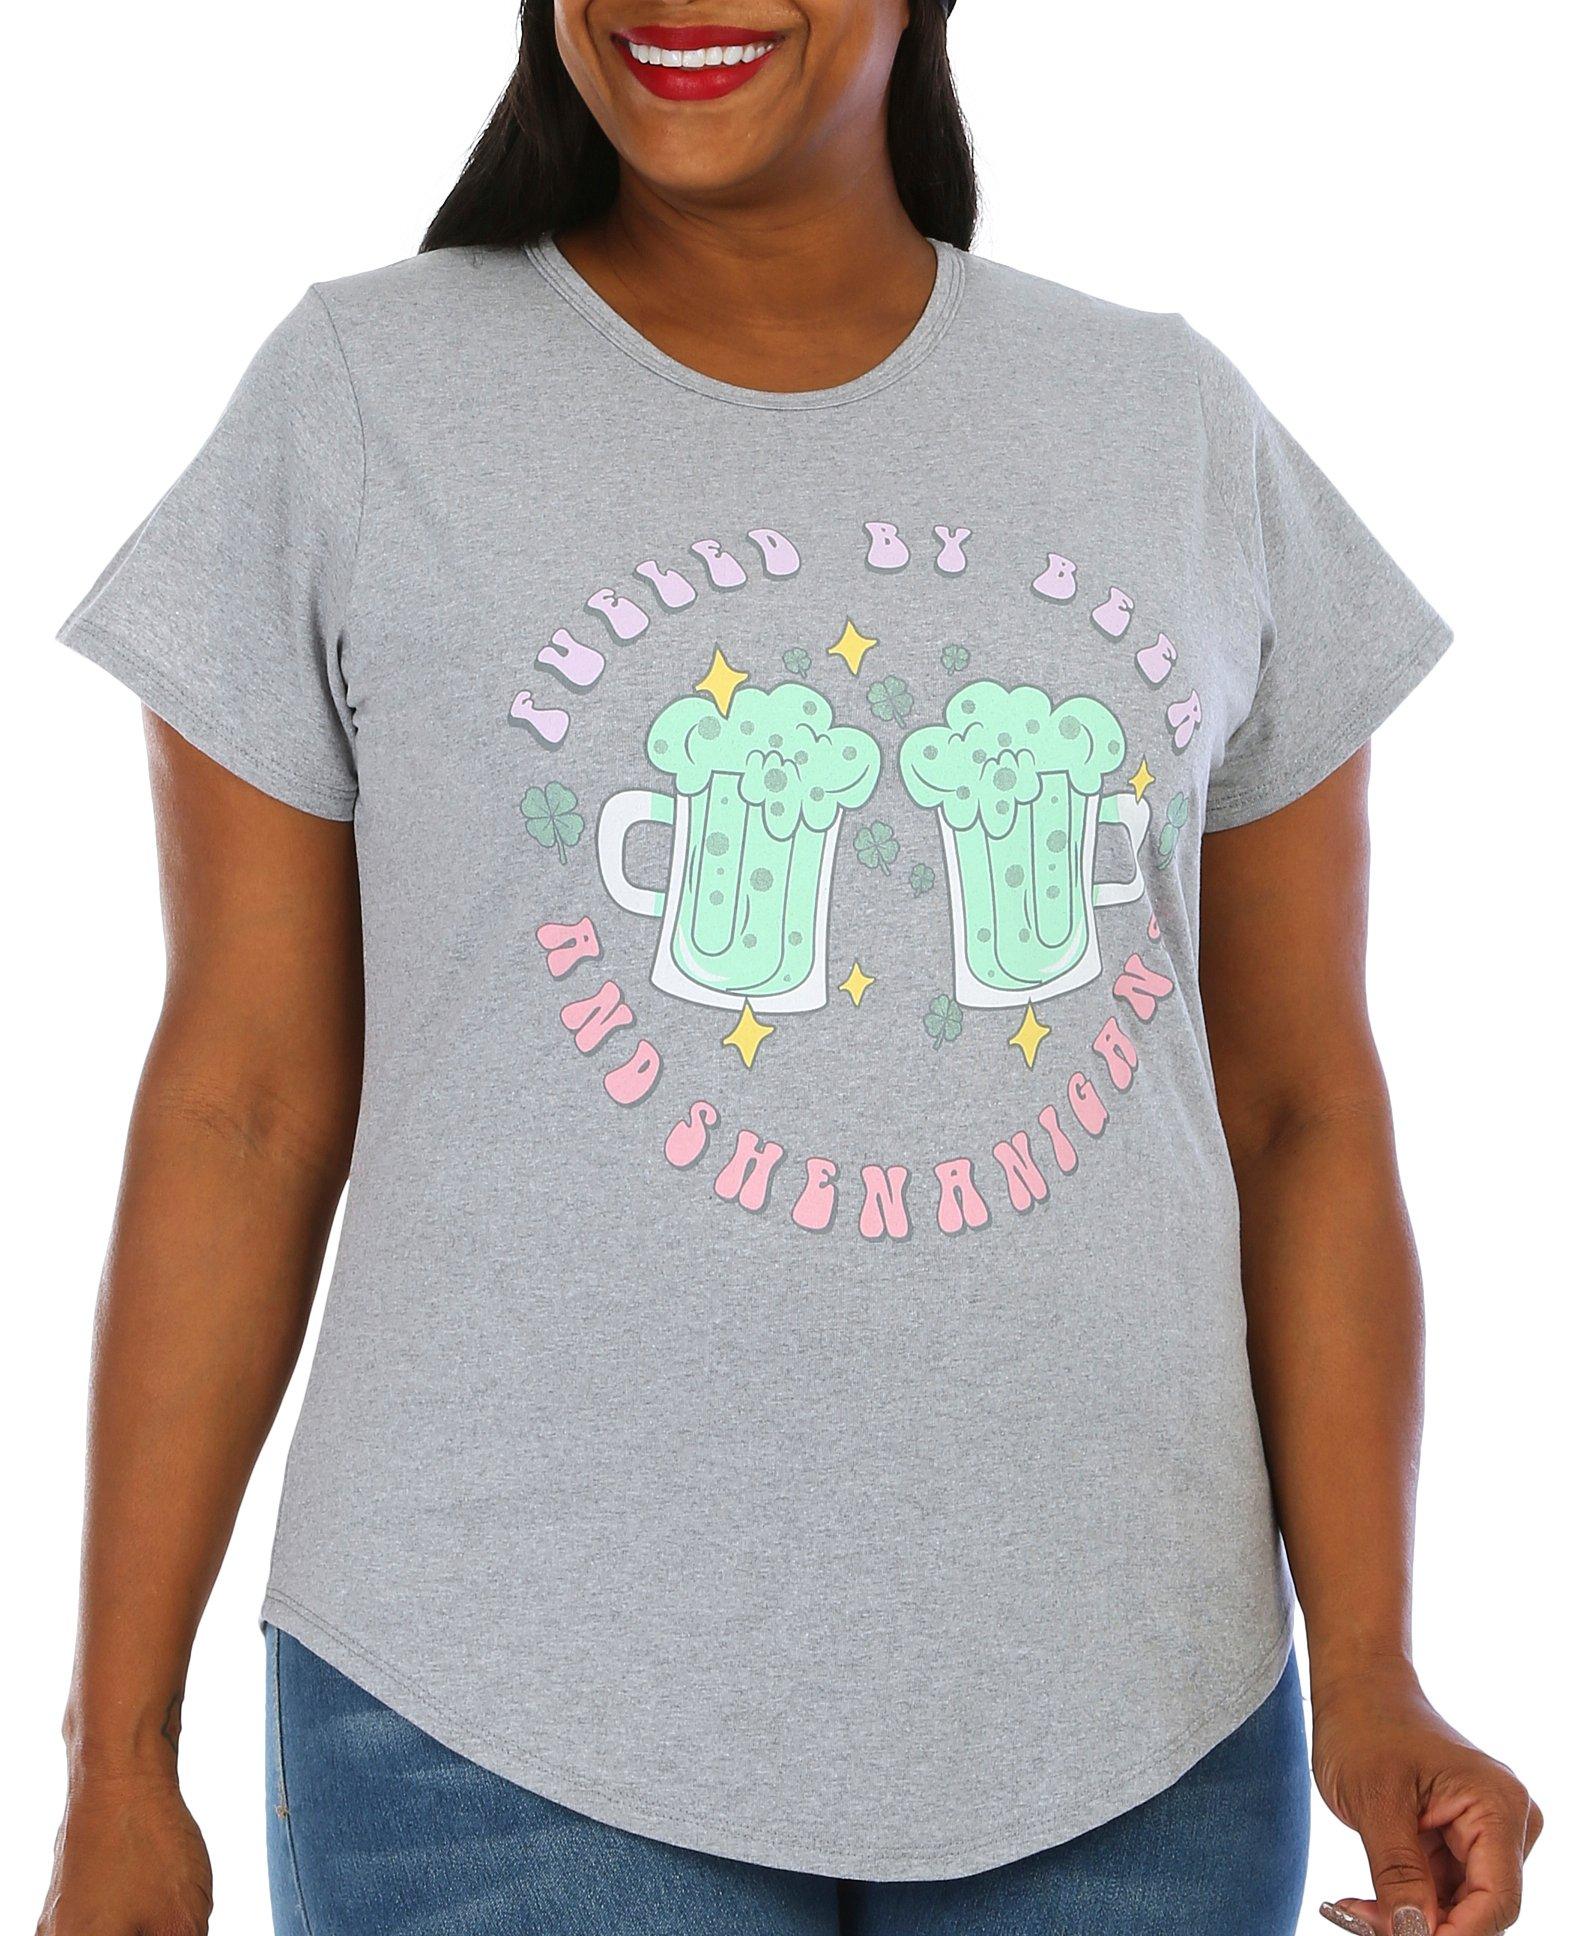 Plus Beer and Shenanigans Short Sleeve T-Shirt